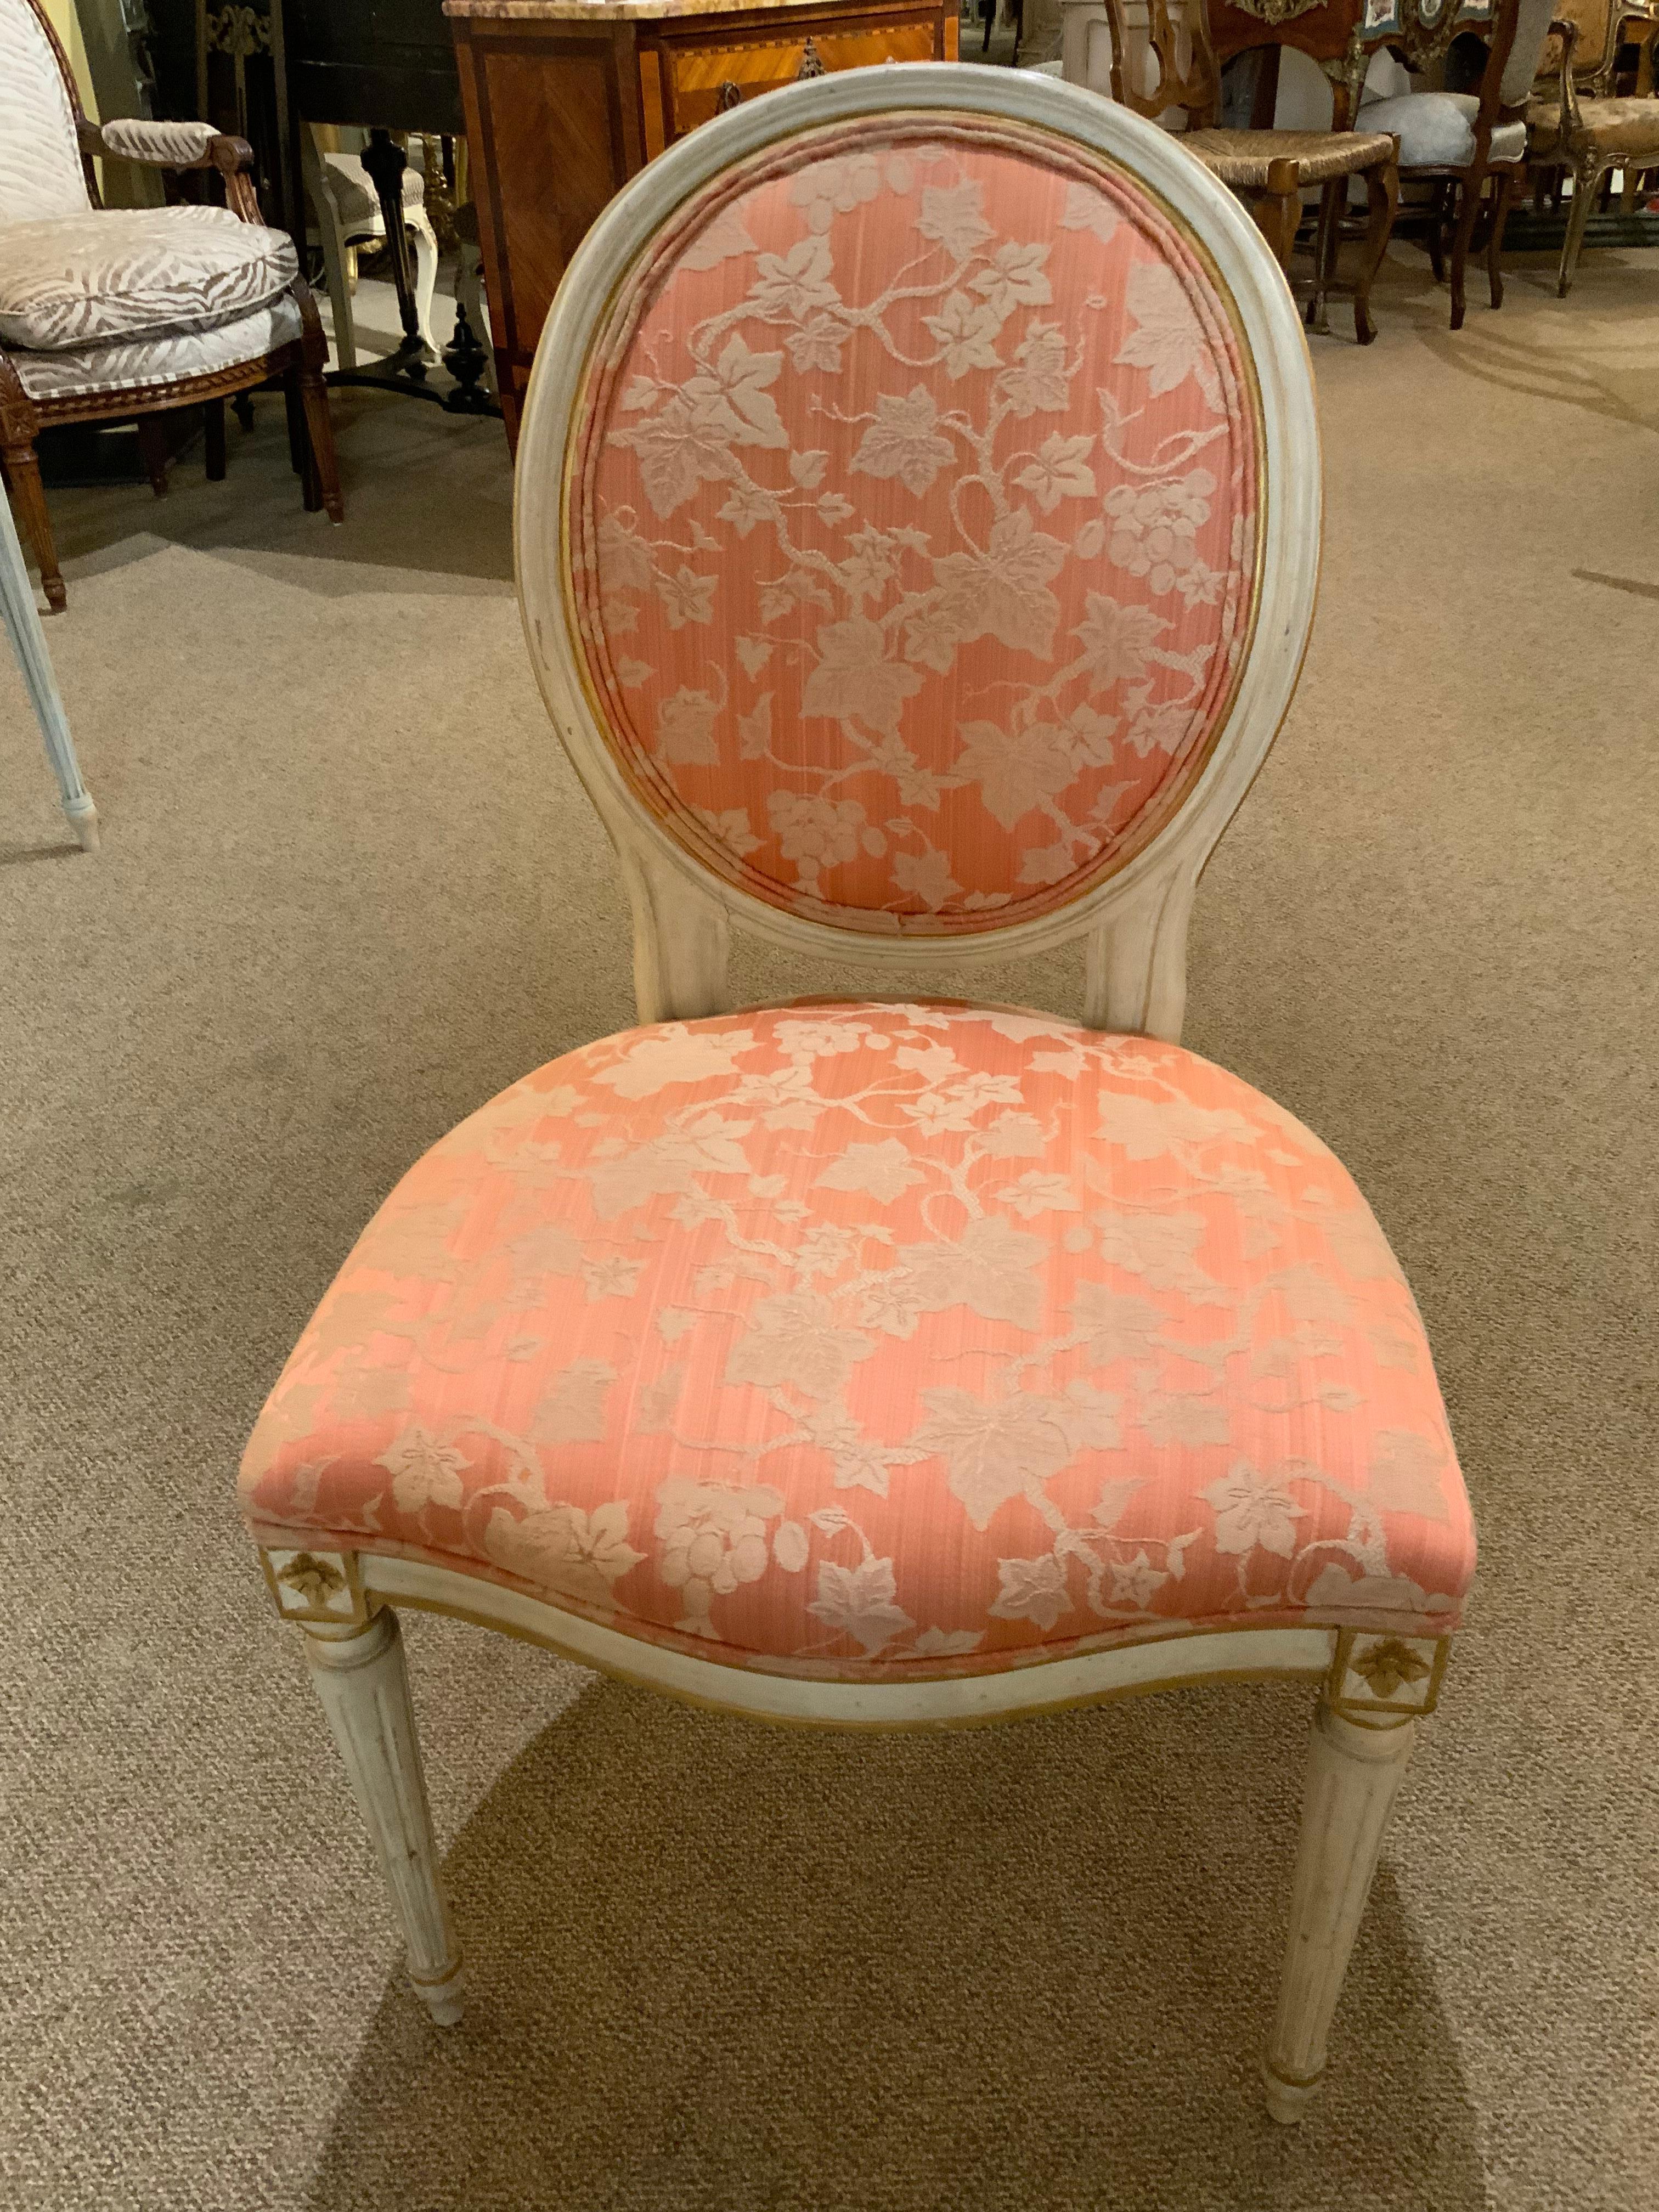 Set of eight upholstered dining chairs which include two high back
Host and hostess chairs. The six side chairs have an oval back
And they are painted in a cream/white hue, With gilt trim at the
Four corners of each leg. The host chairs are in a